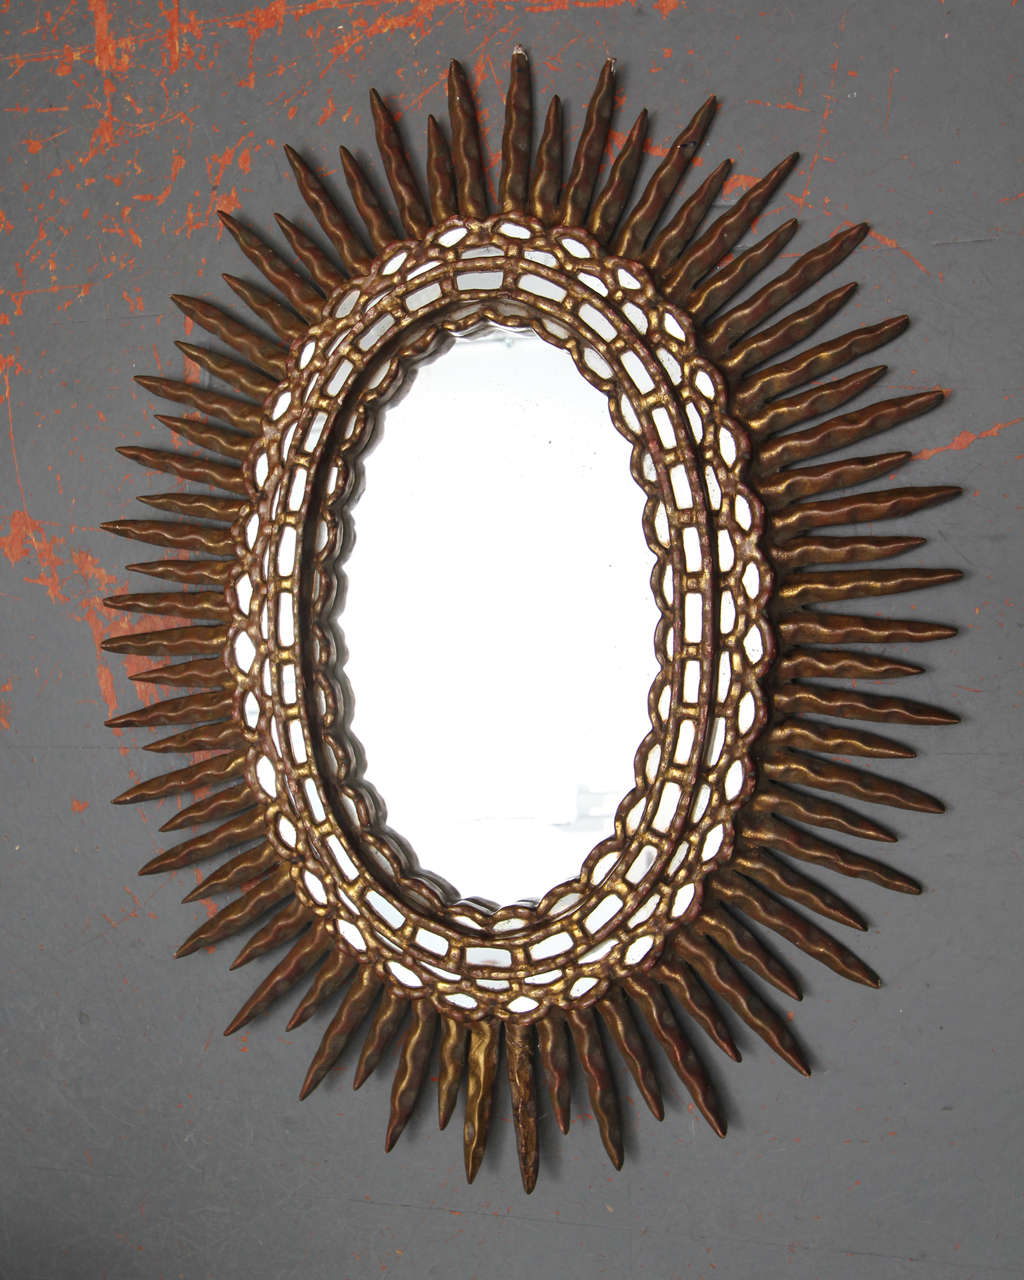 Oval sunburst mirror of gilded wood frame with rich brick red undertones.